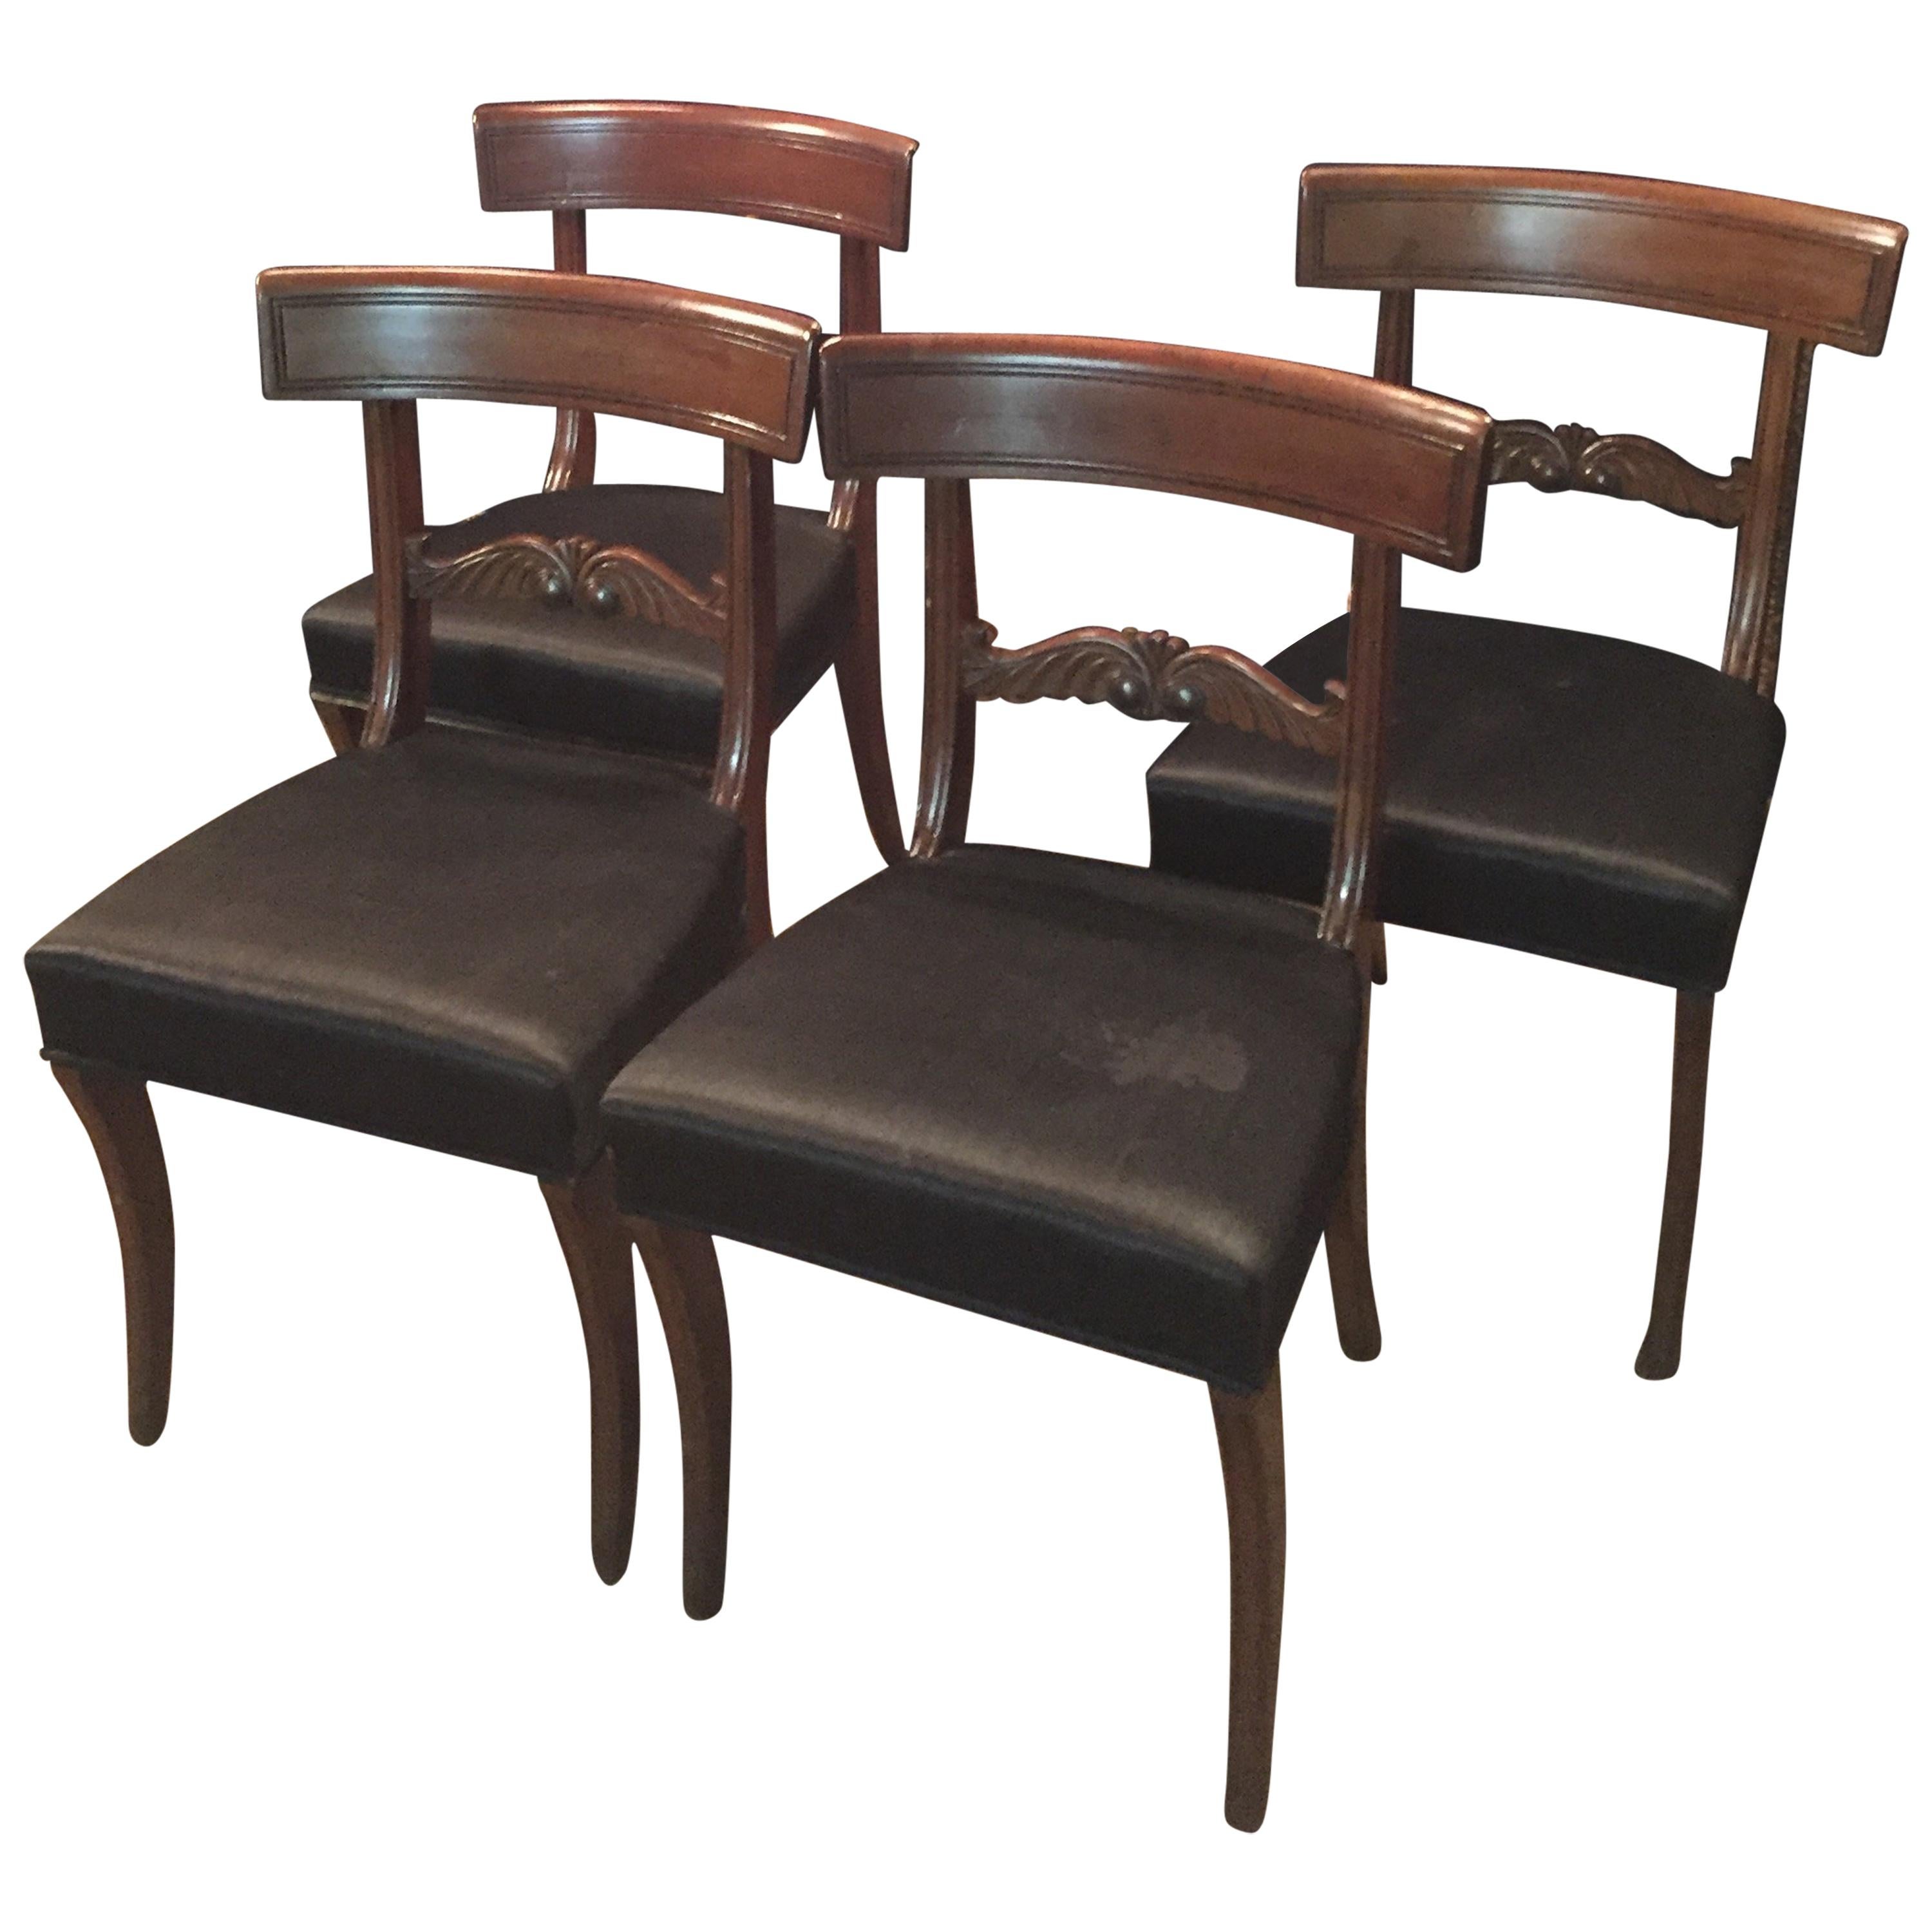 19th Century 4 Biedermeier Saber-Legs Chairs Are Solid Mahogany